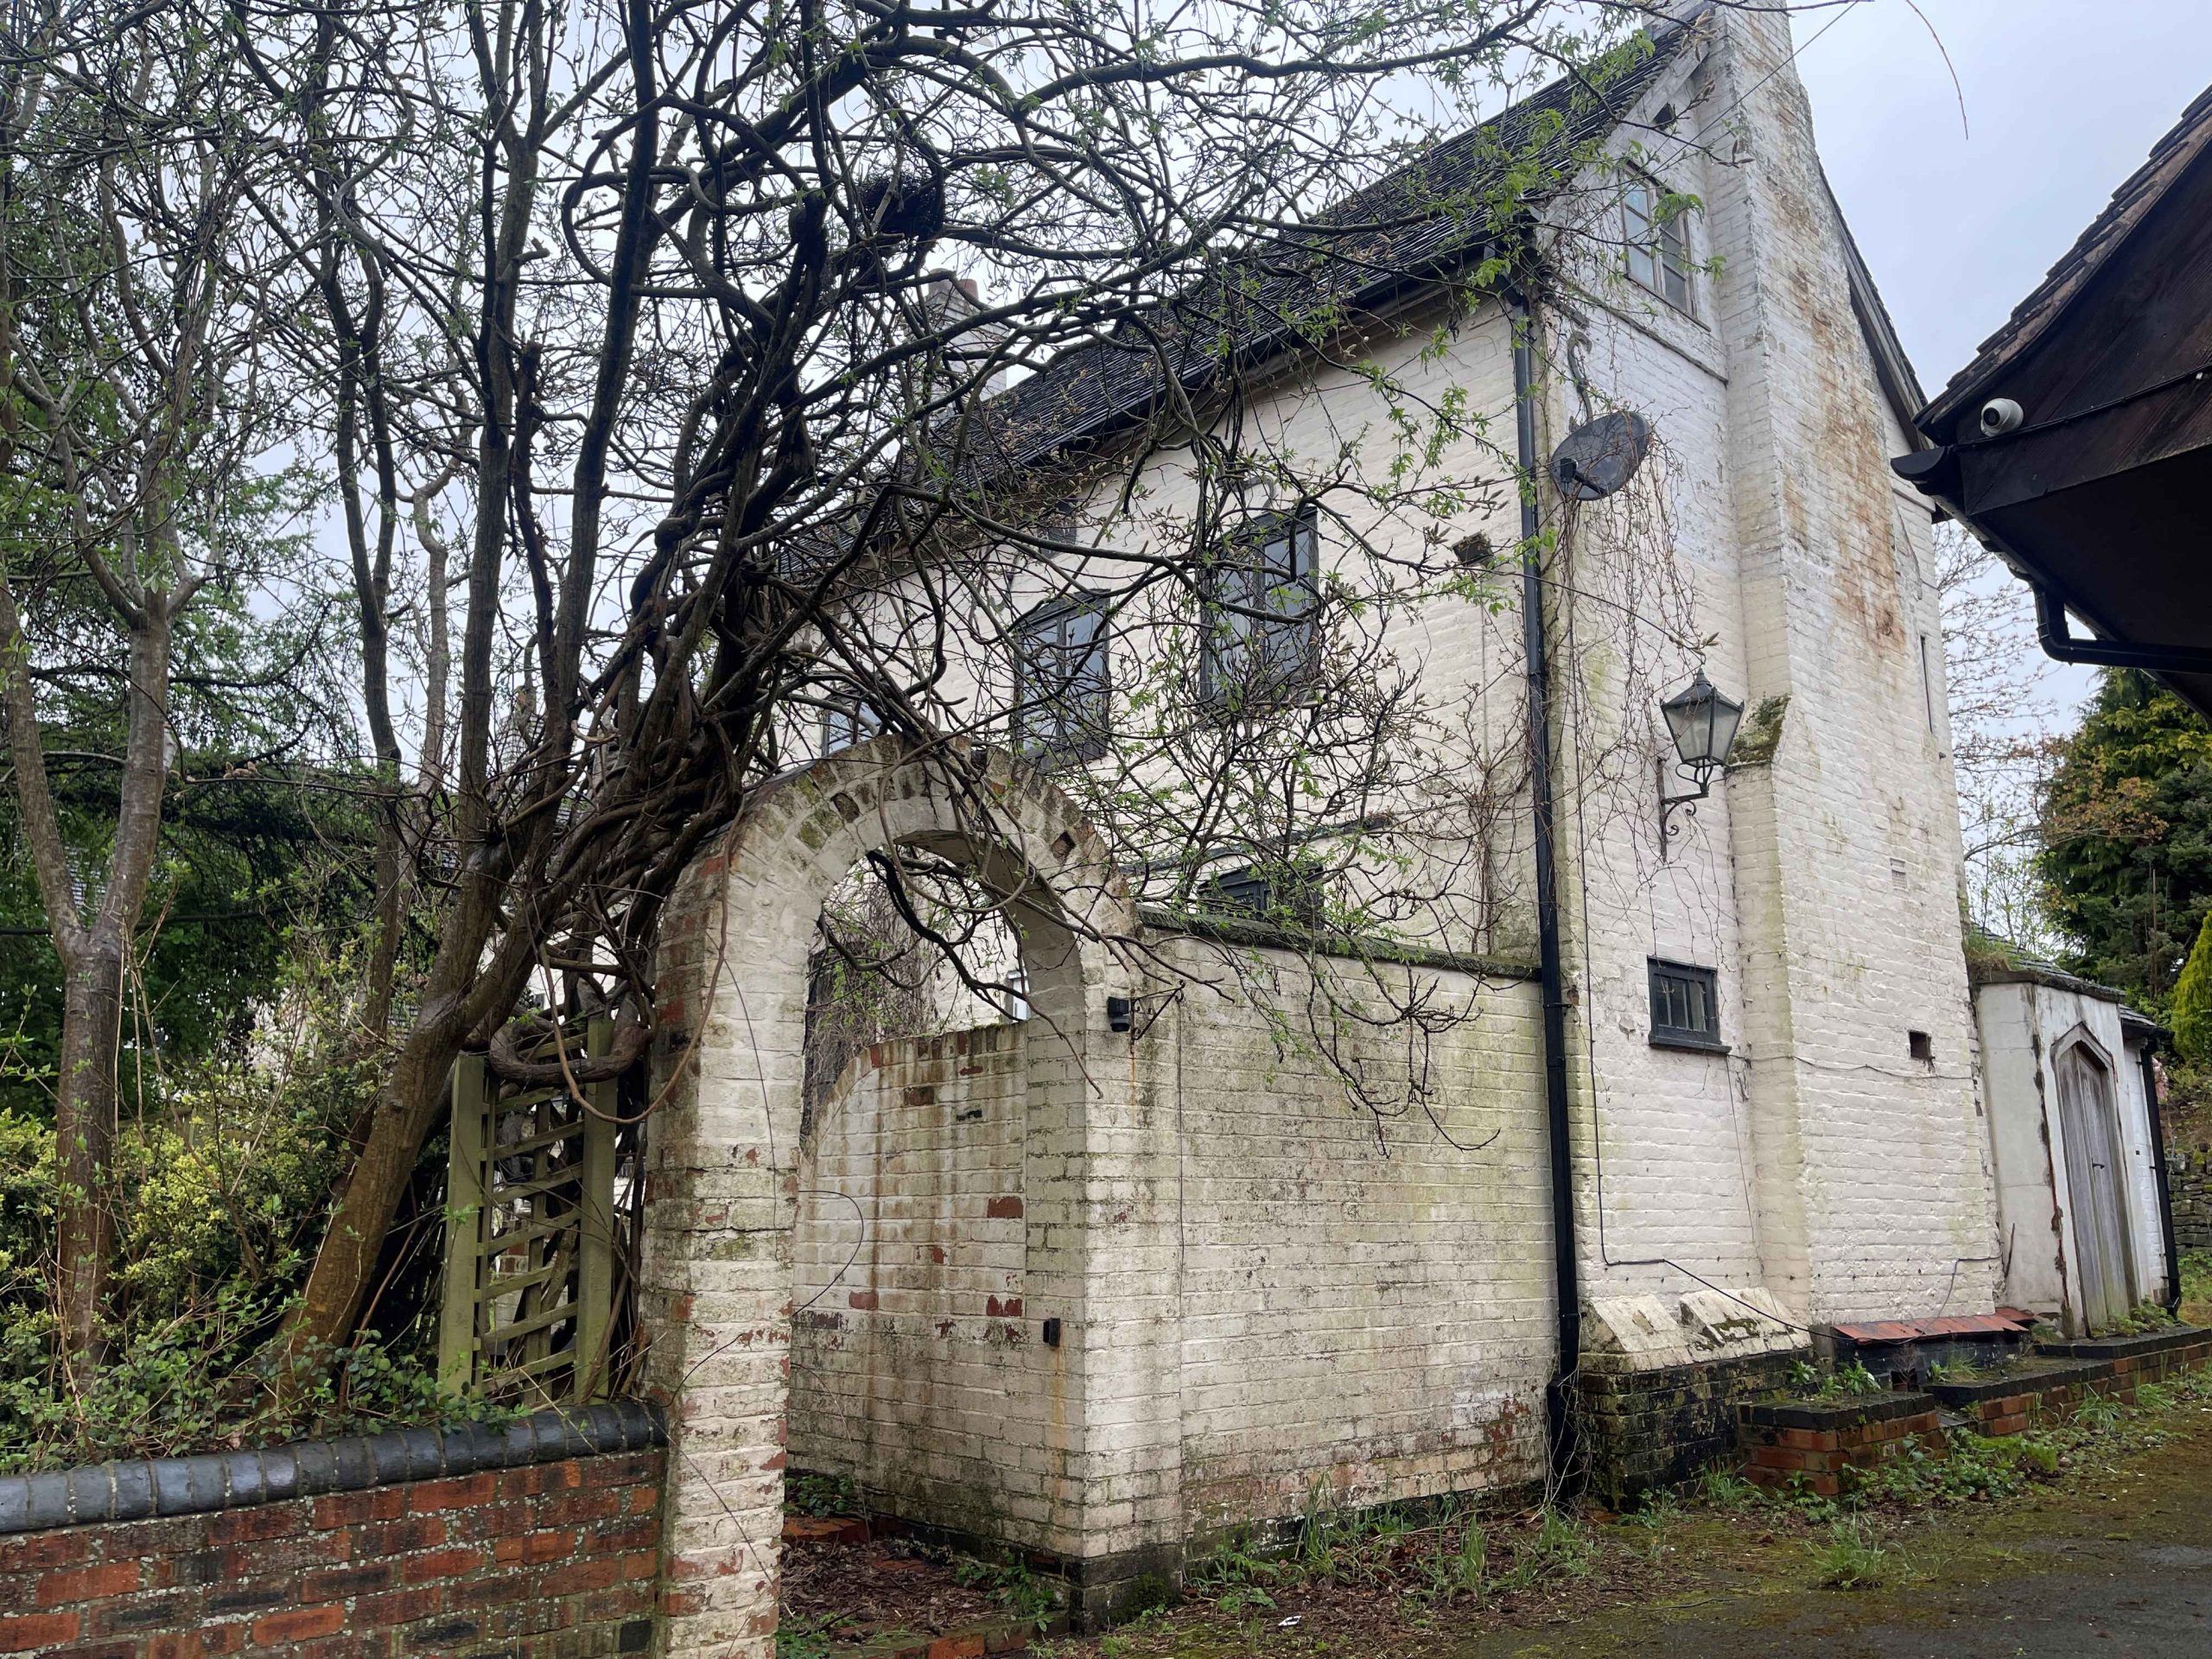 Strong bidding expected for 18th century Staffordshire mill house in Bond Wolfe’s next auction